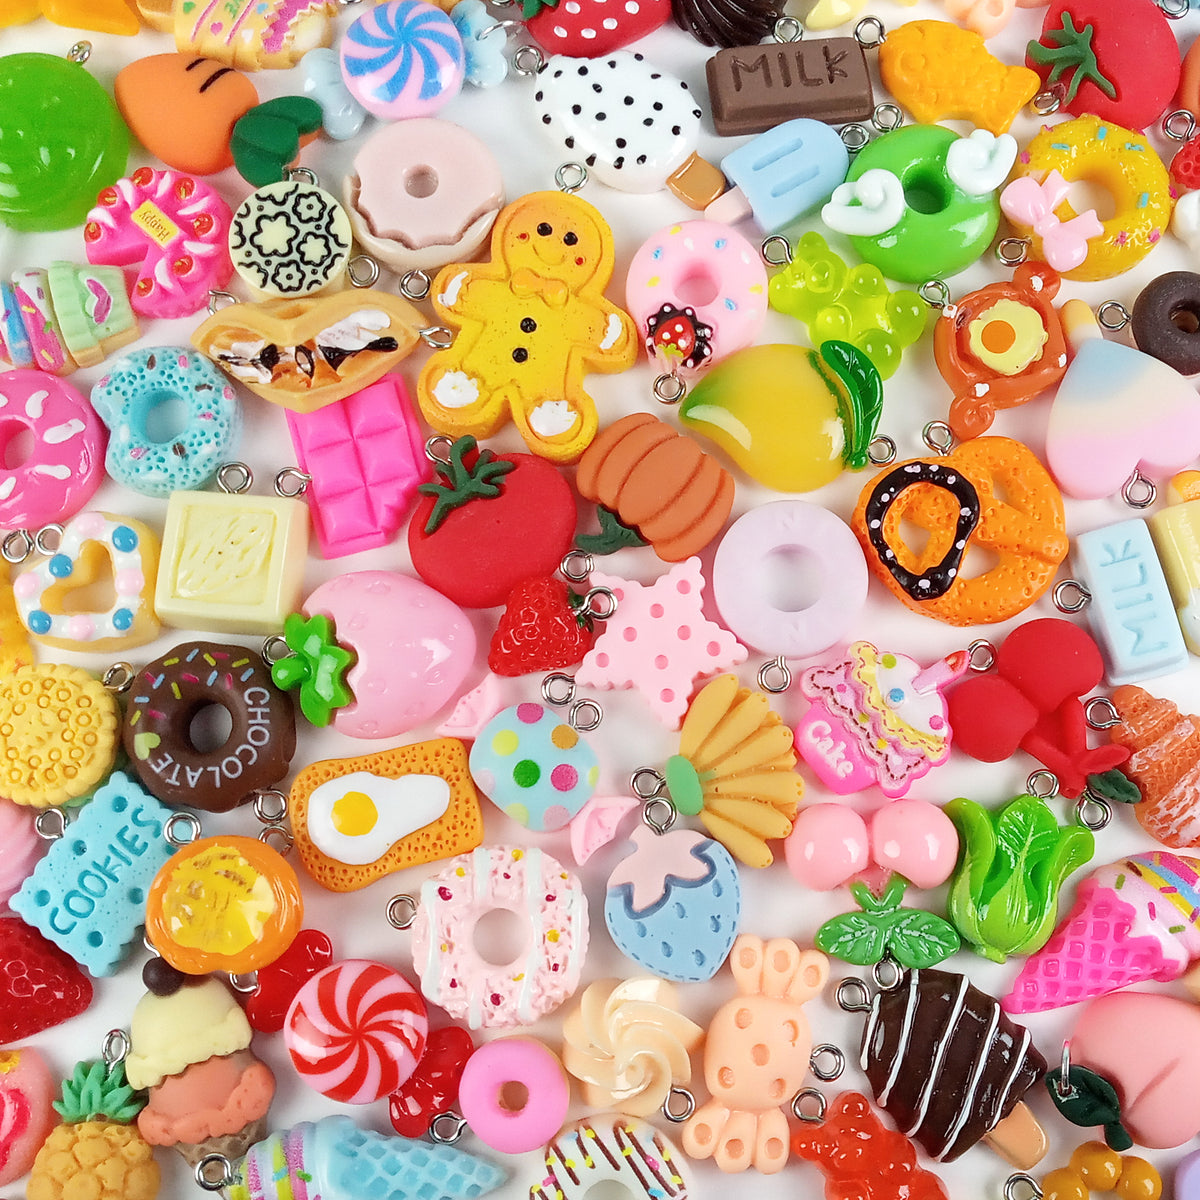 BULK Super Kawaii Bread Pastel Charms for Slime, Bread Assorted